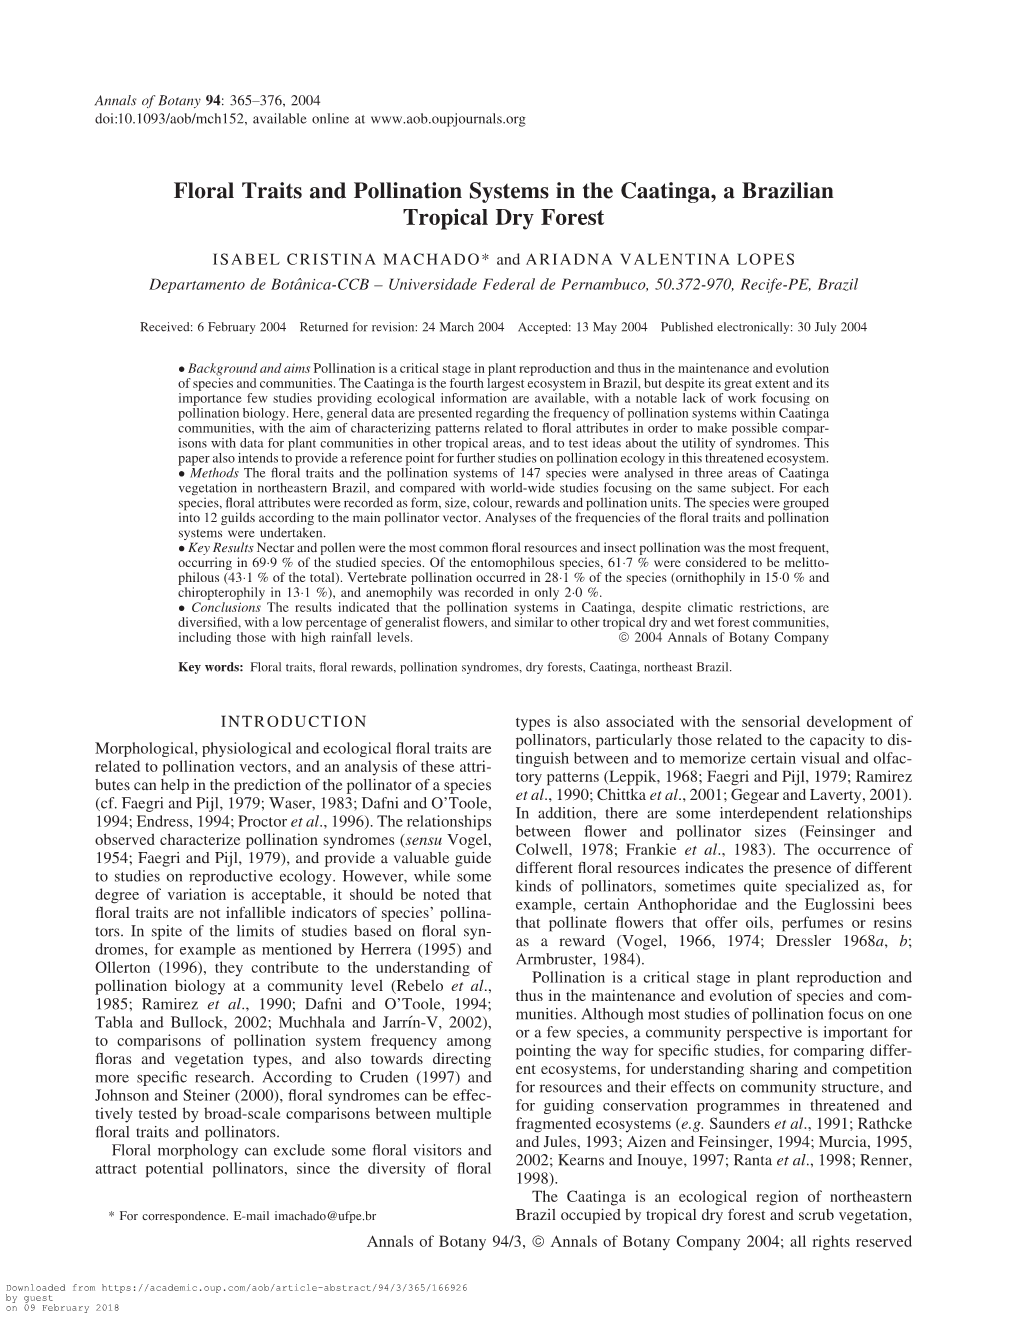 Floral Traits and Pollination Systems in the Caatinga, a Brazilian Tropical Dry Forest